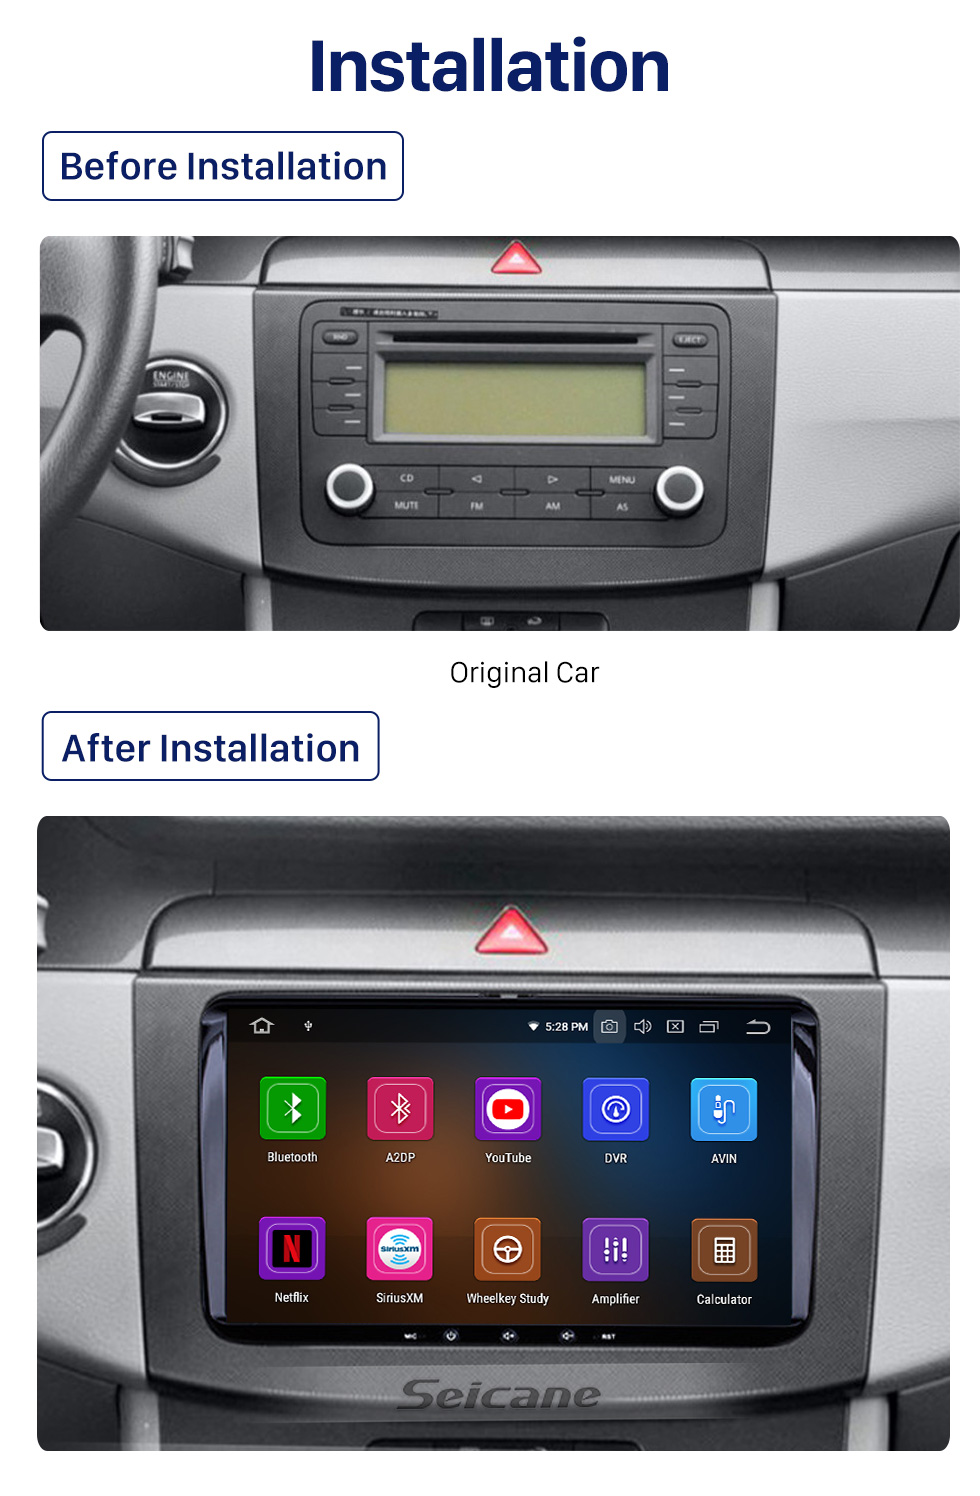 Seicane 9 inch Android 10.0 Aftermarket OEM Autoradio GPS Navigation Stereo for VW Volkswagen Universal SKODA Seat with HD 1024*600 Touch Screen OBD2 Mirror Radio DVD Player